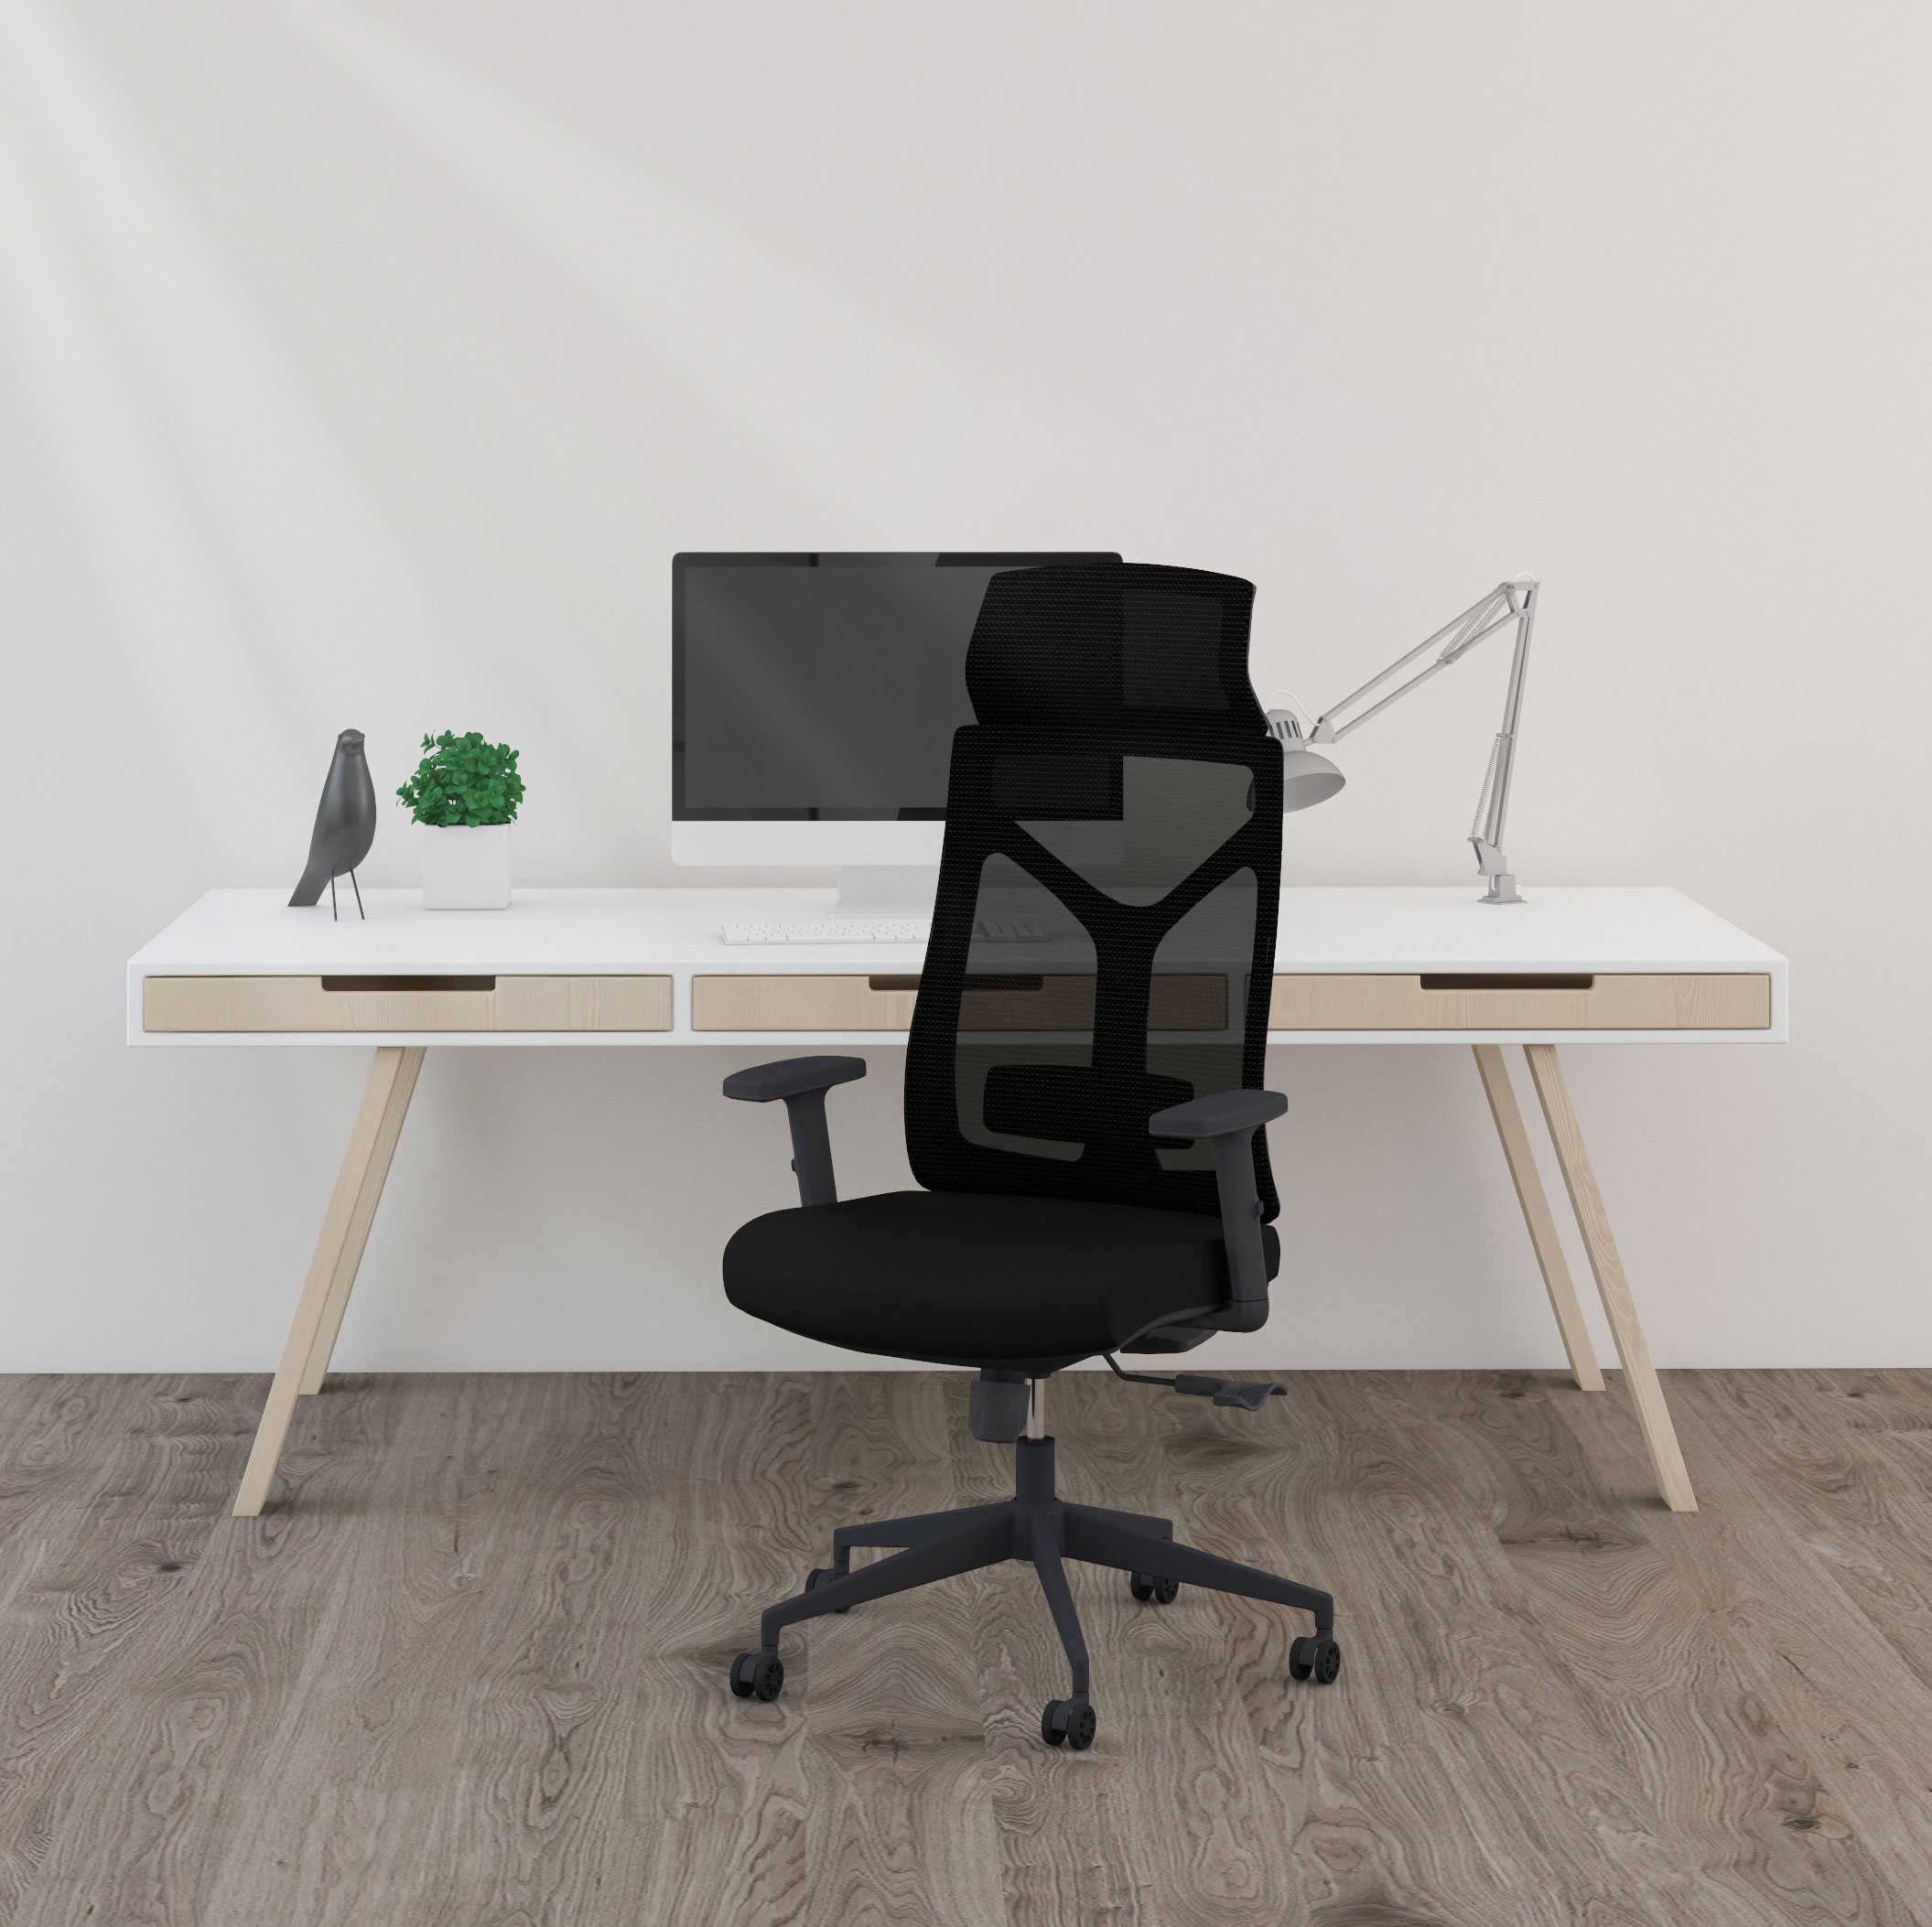 Office furniture purchase tips!